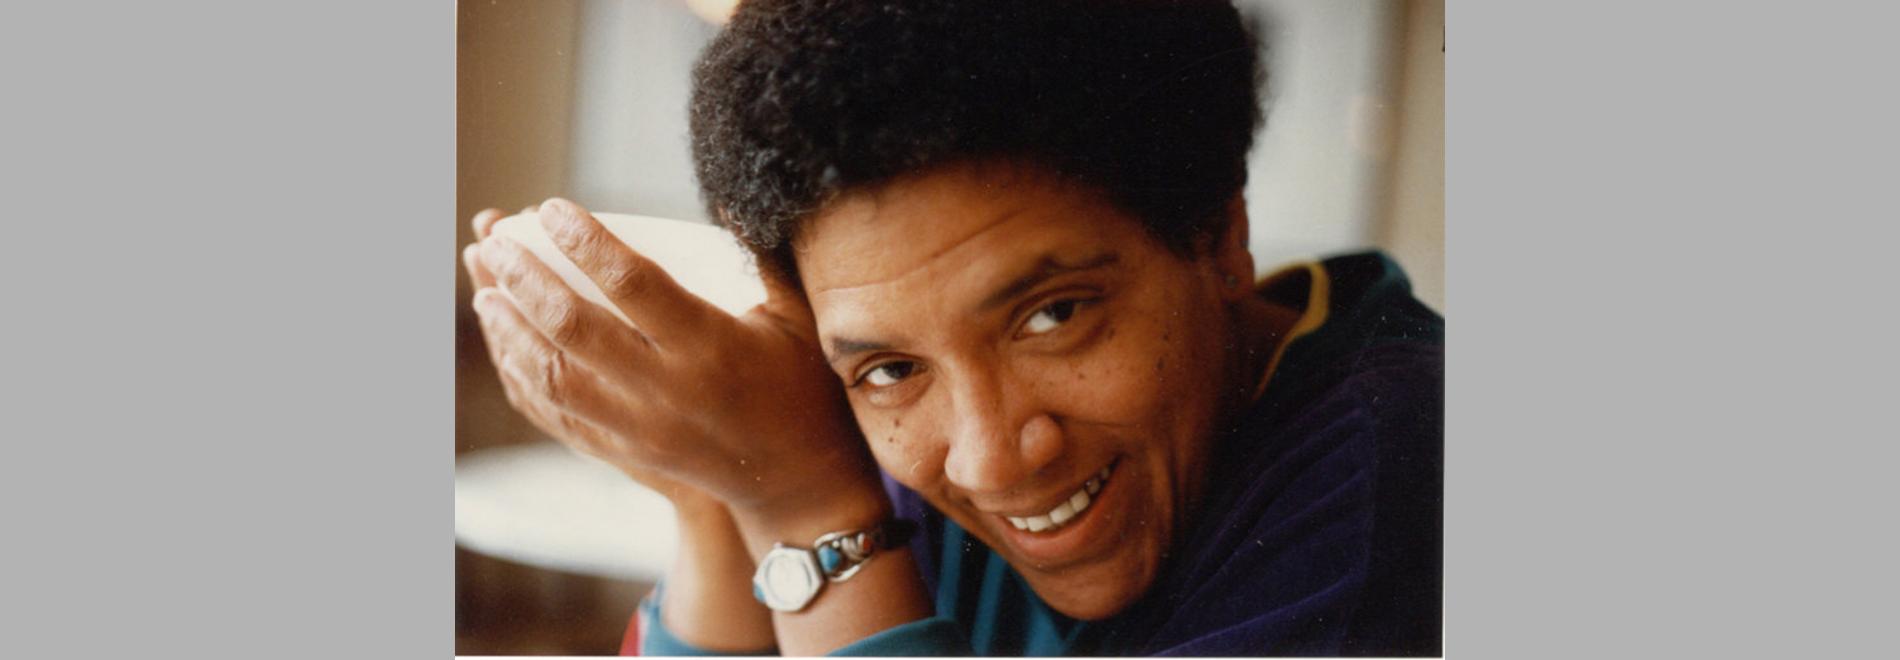 Audre Lorde - The Berlin Years 1984 to 1992 